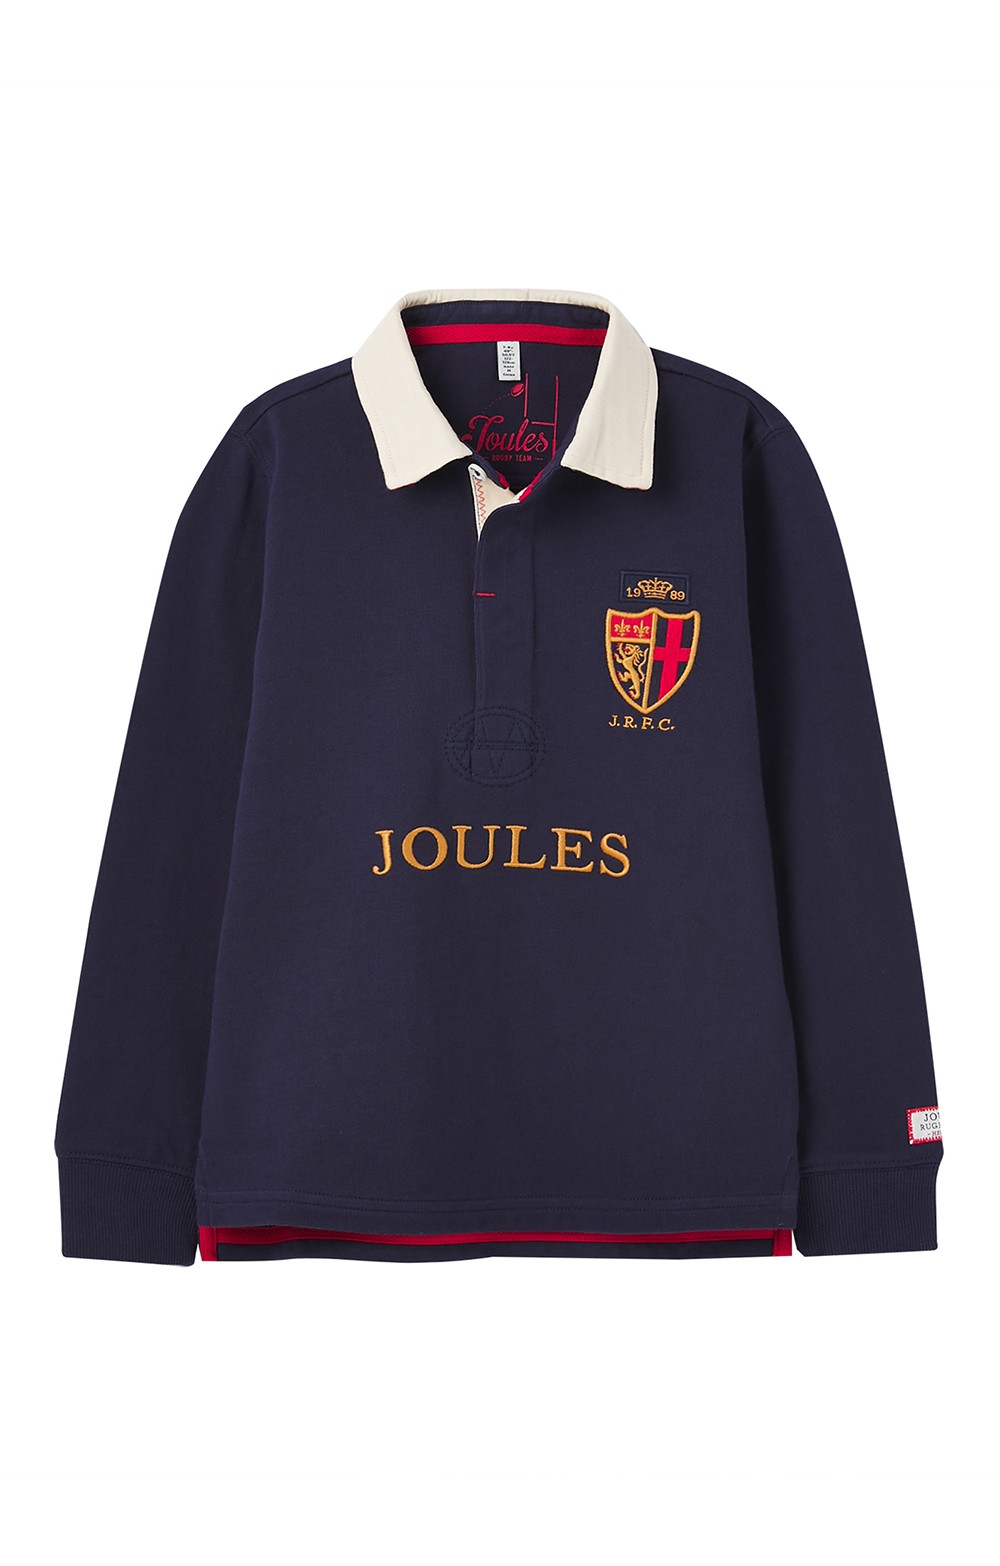  Boys Union Rugby Shirt, French Navy